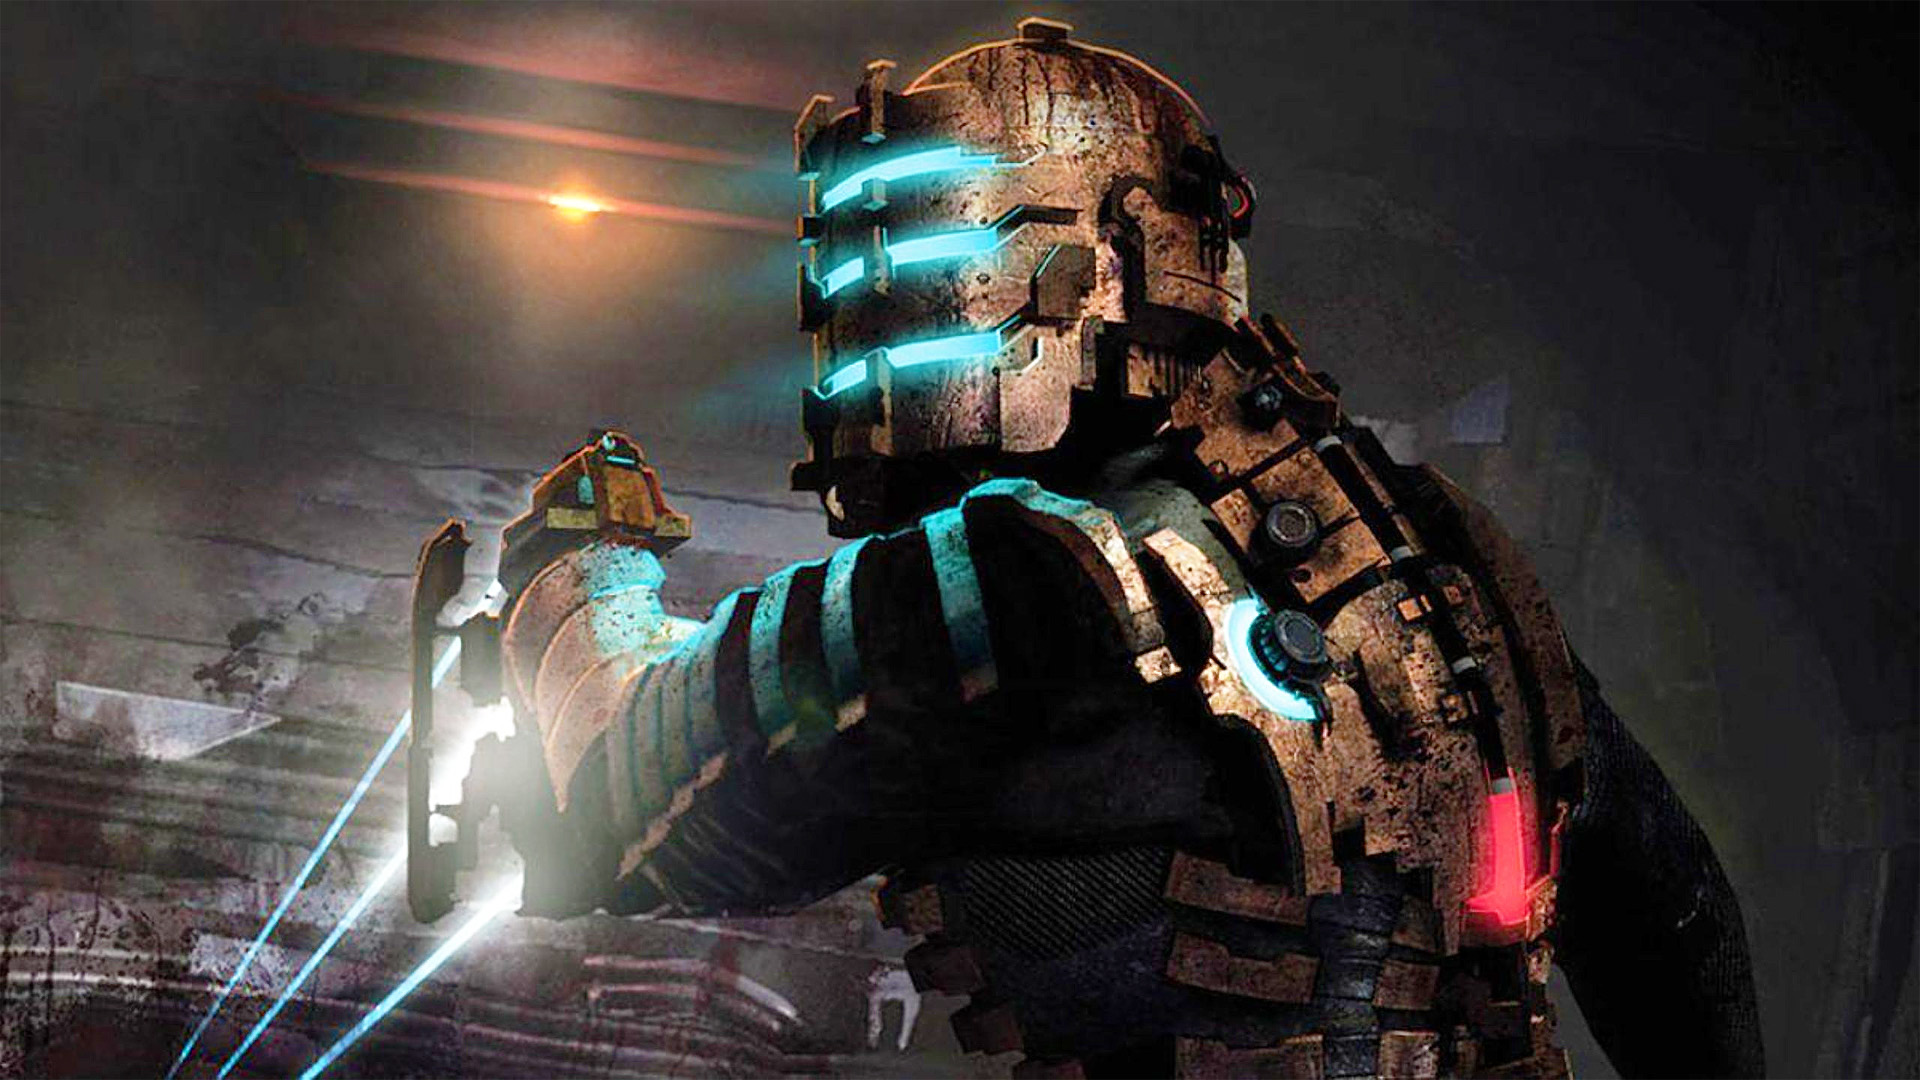 Dead Space Remake Locks Down an Early 2023 Release Date, Shows off New Gameplay